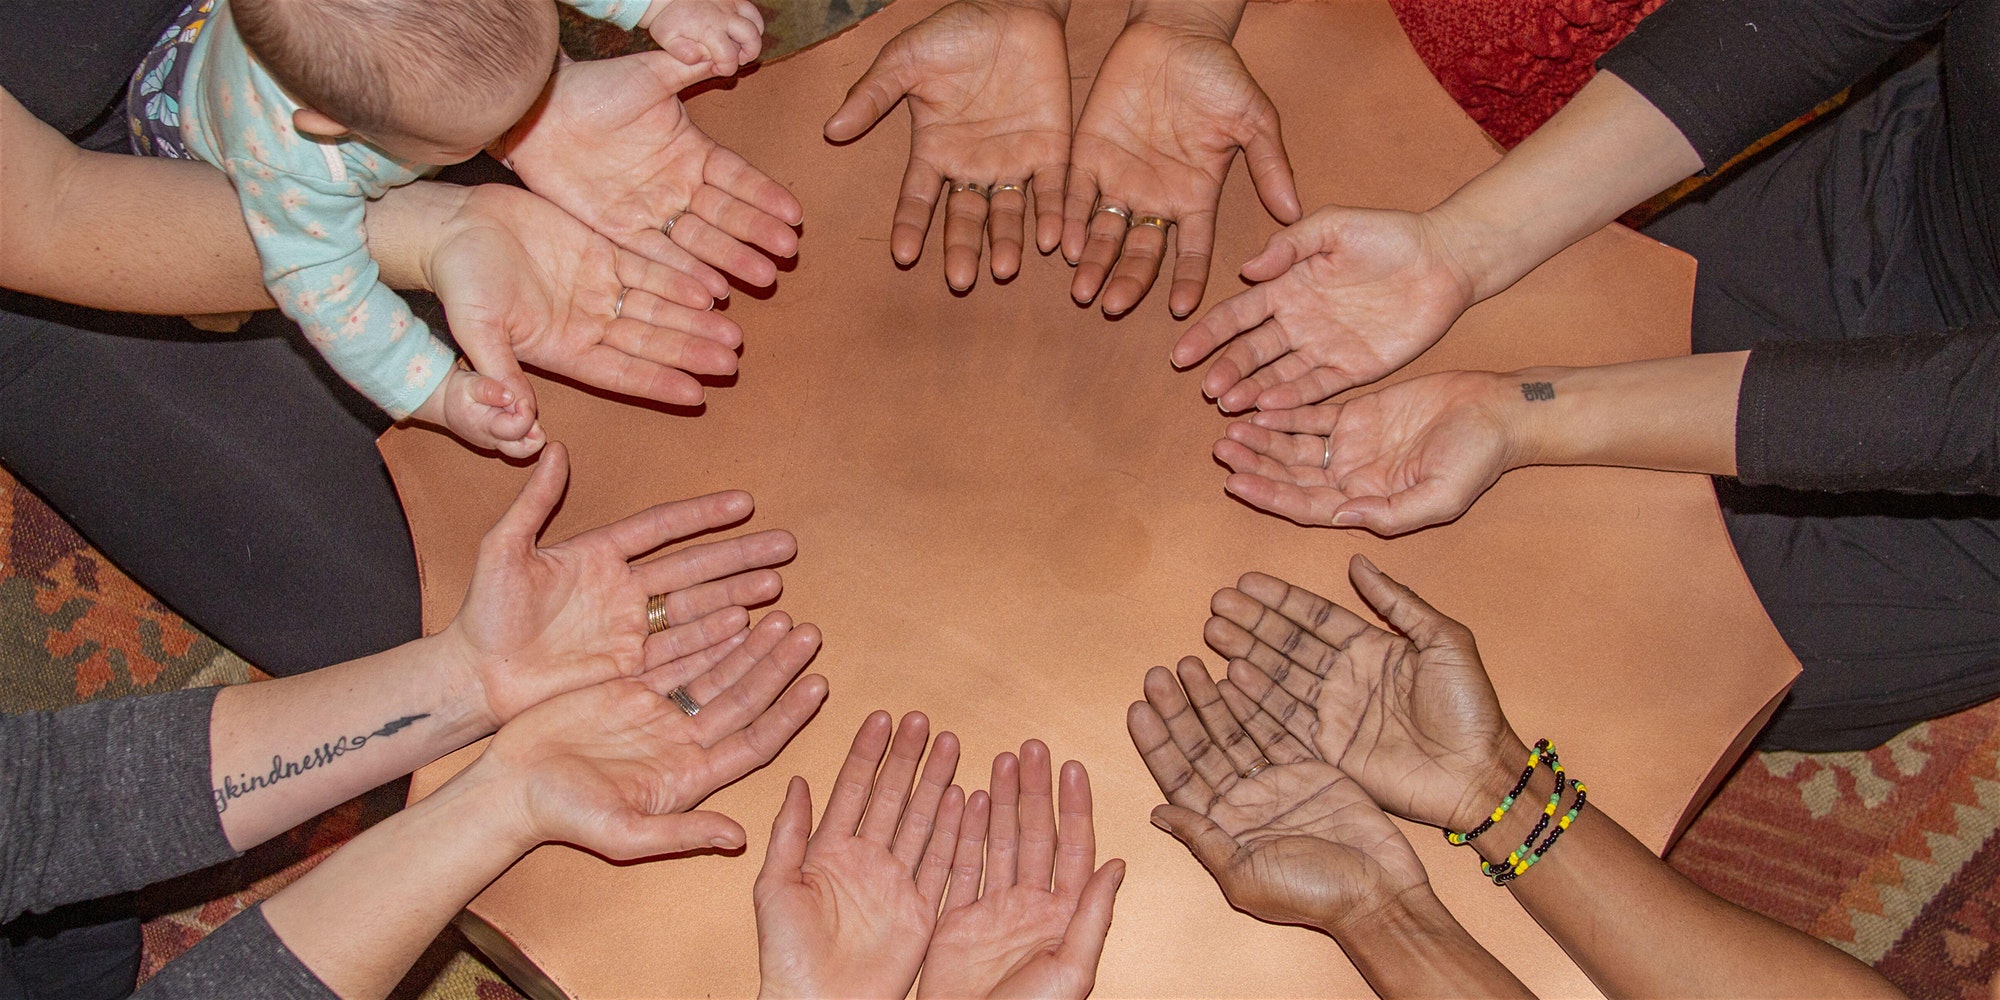 A group of 6 people sit in a circle with their hands in a circle and palms facing up.